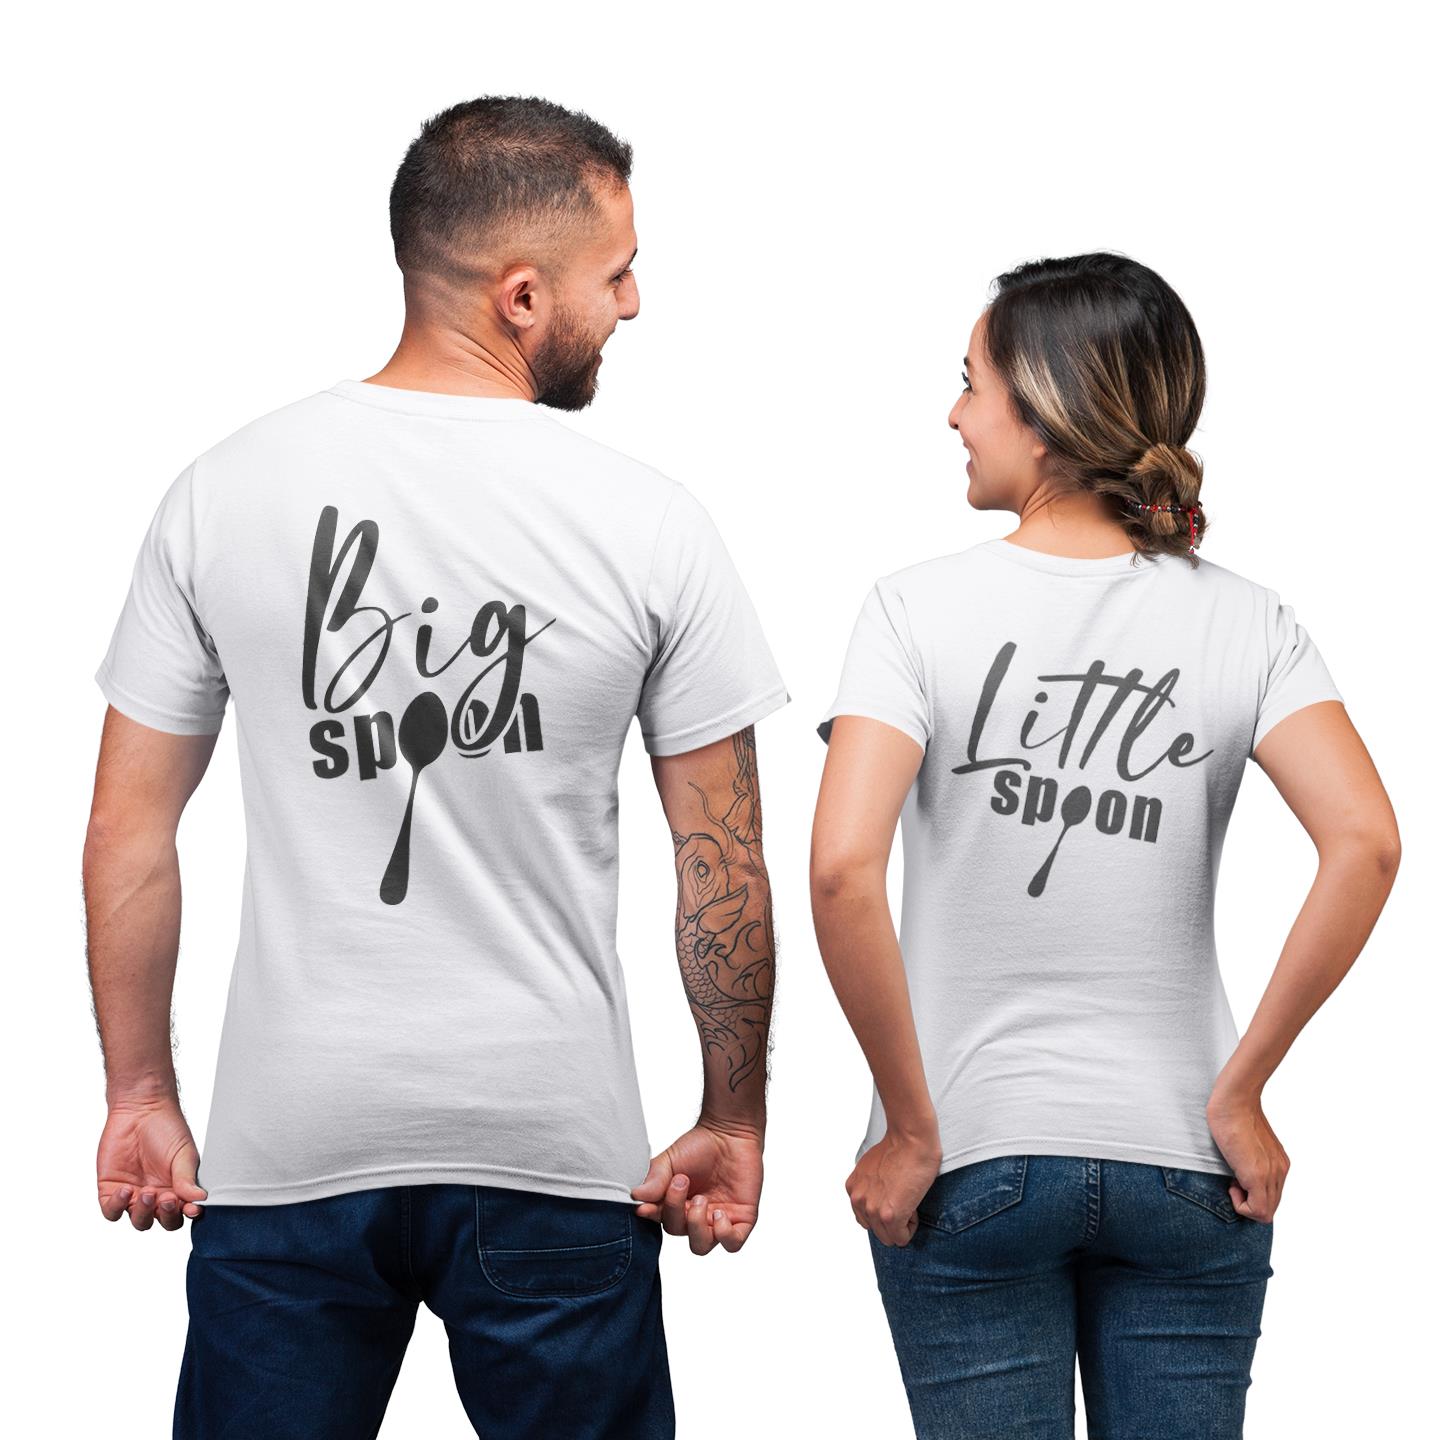 Big Spoon Little Spoon Funny Shirt For Couple Lover Matching T-shirt